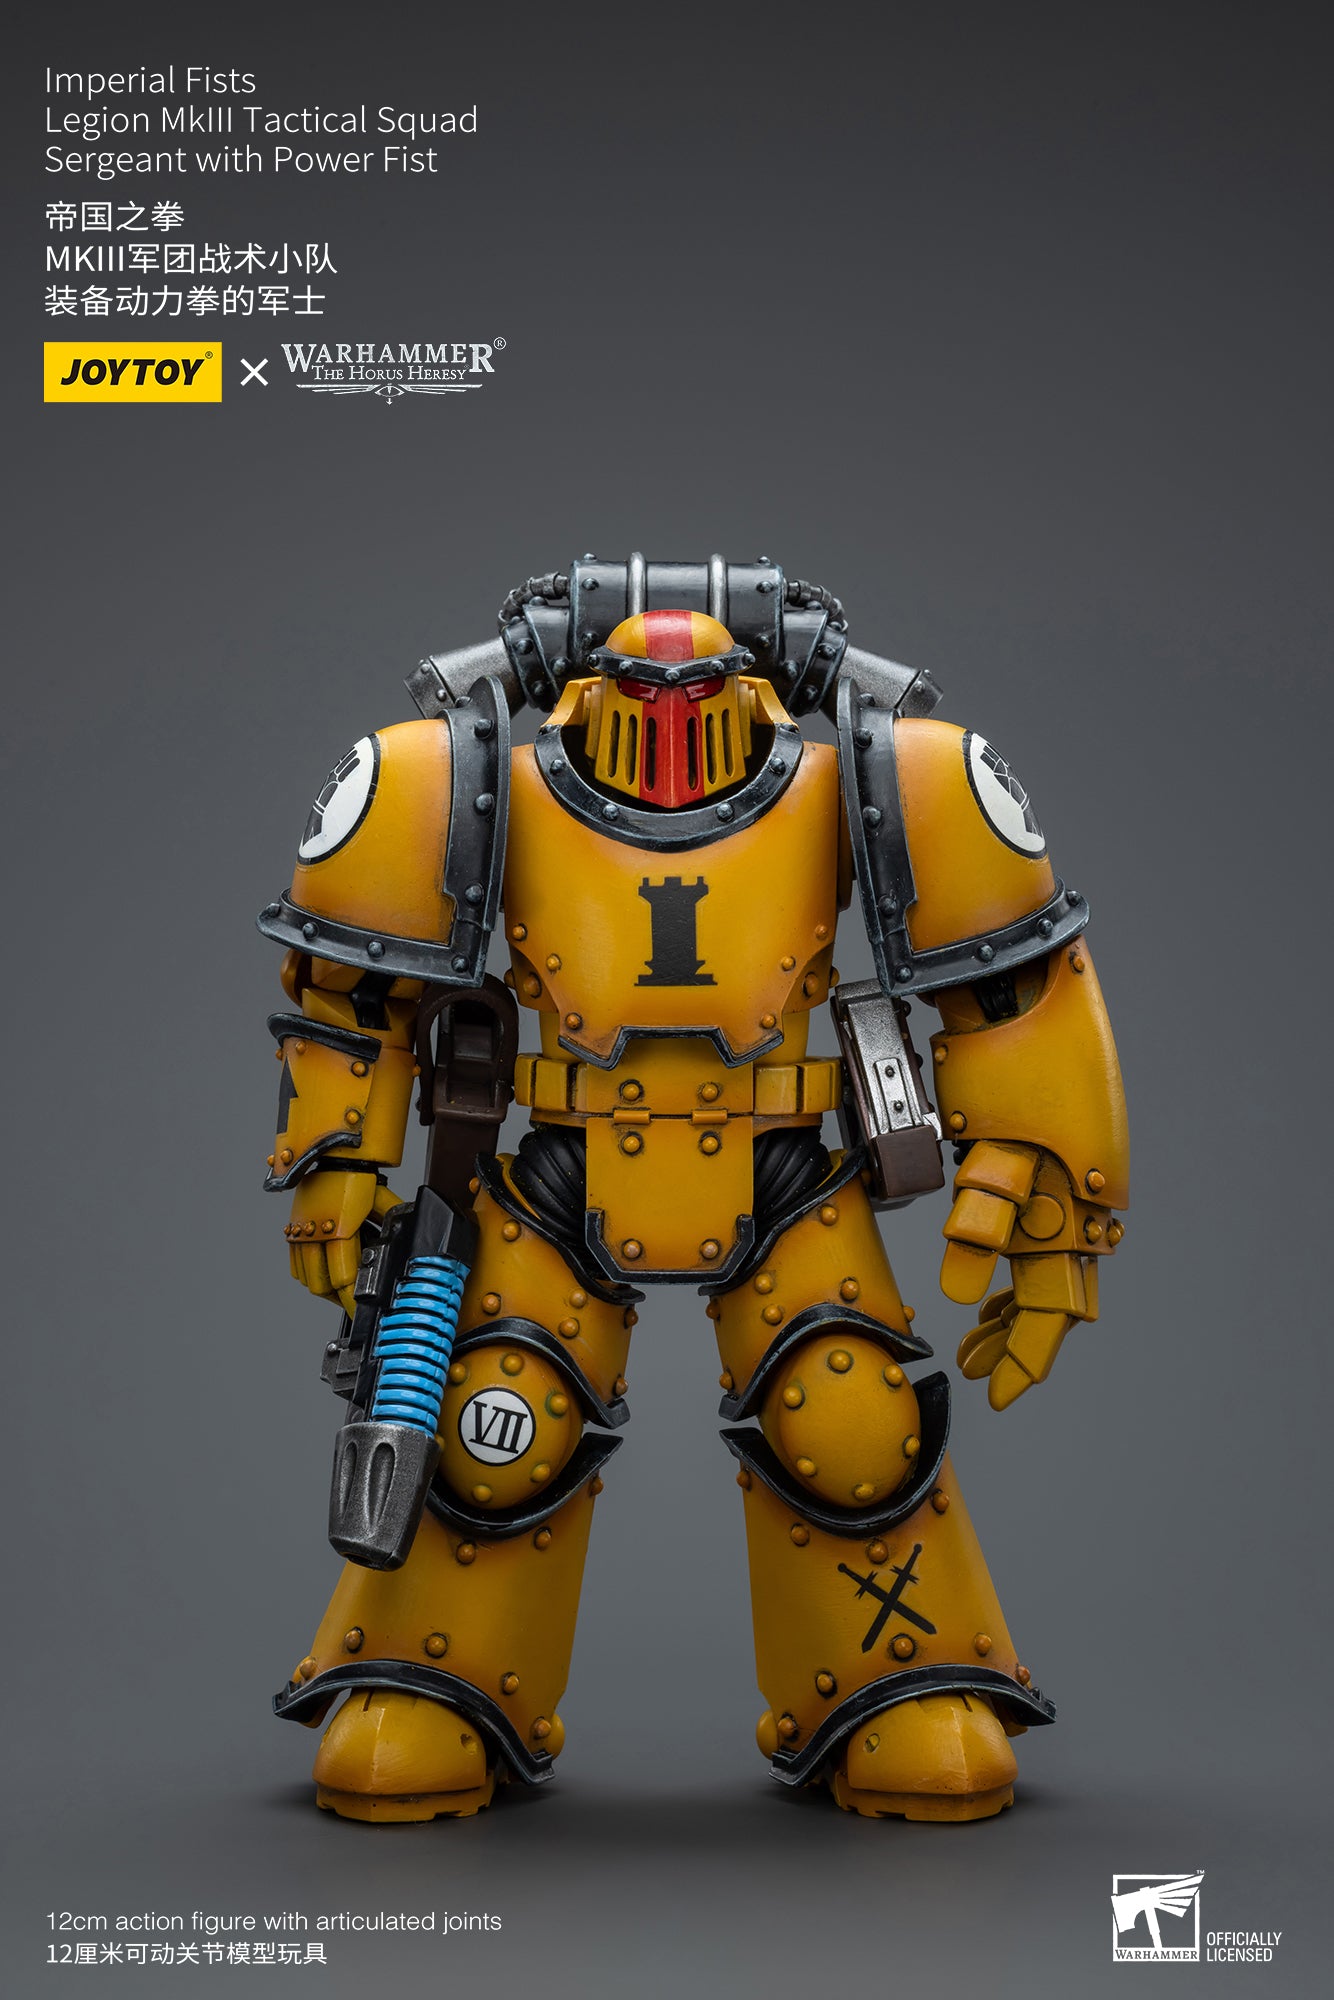 Warhammer: The Horus Hersey: Imperial Fists:Legion MkIII Tactical Squad Sergeant with Power Fist: Joy Toy